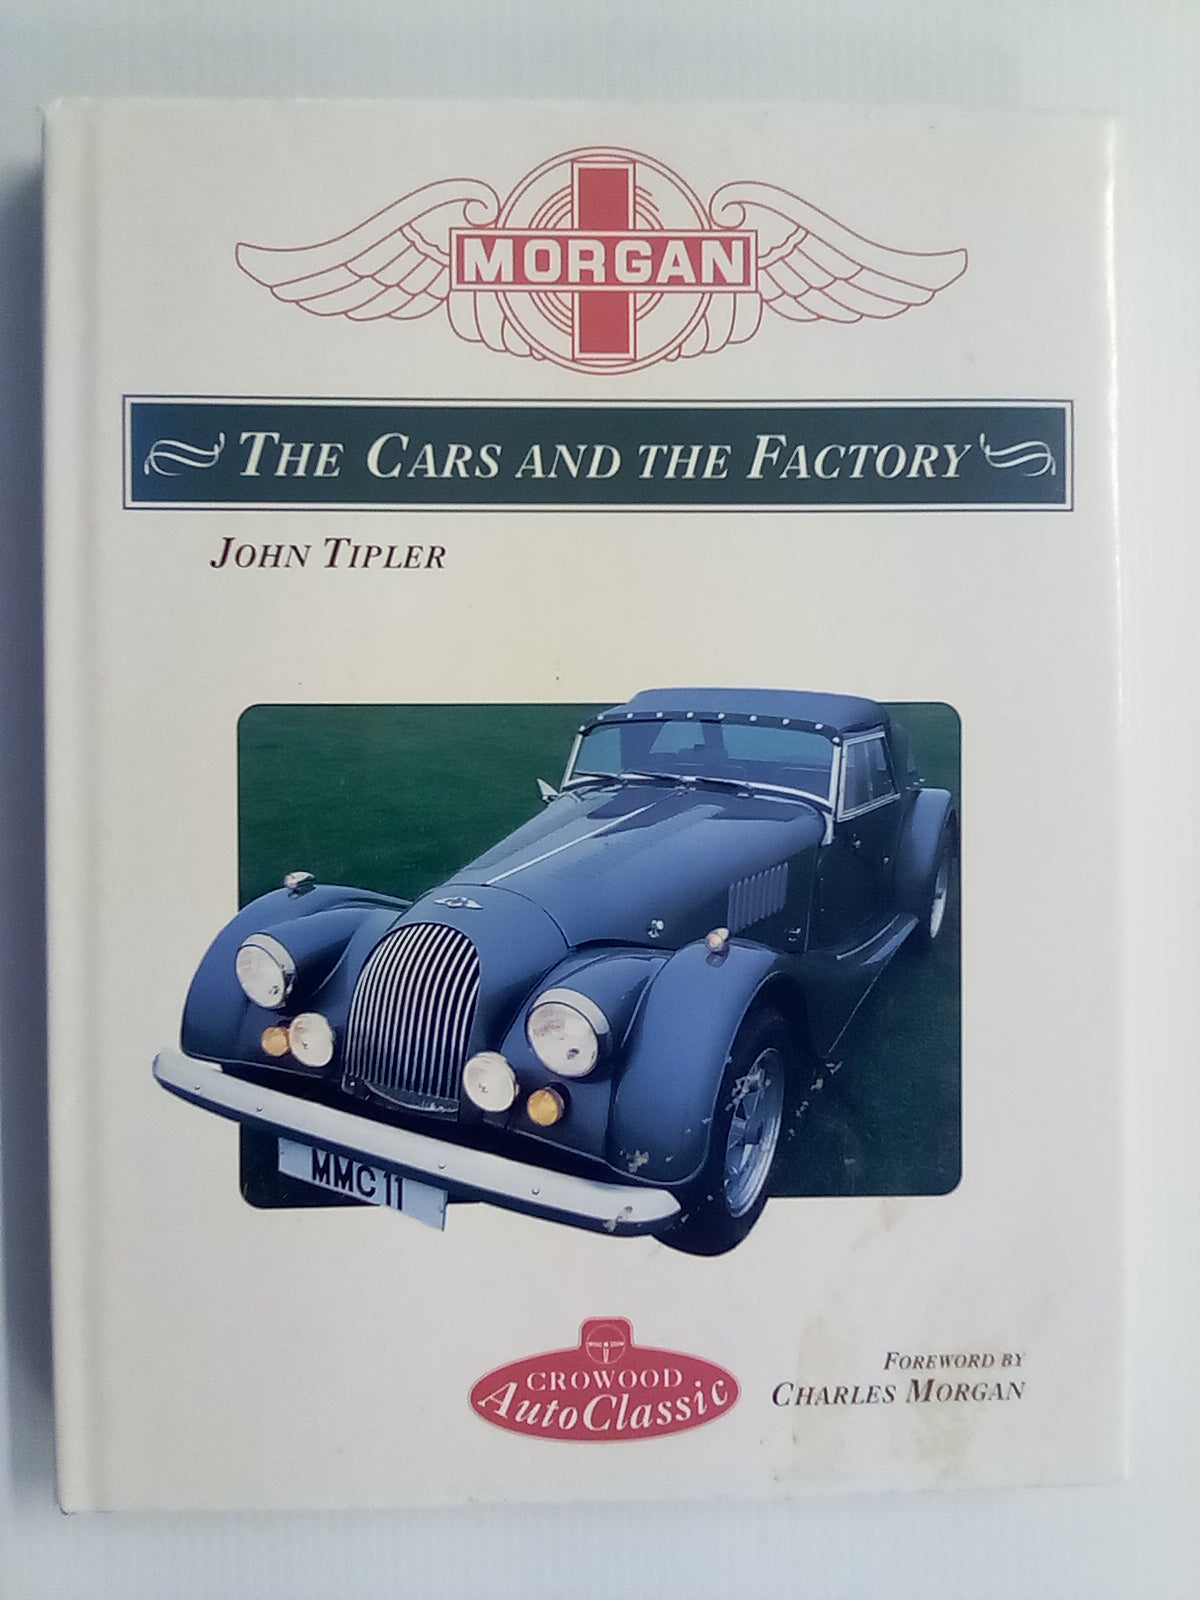 Morgan - The Cars & The Factory by John Tipler